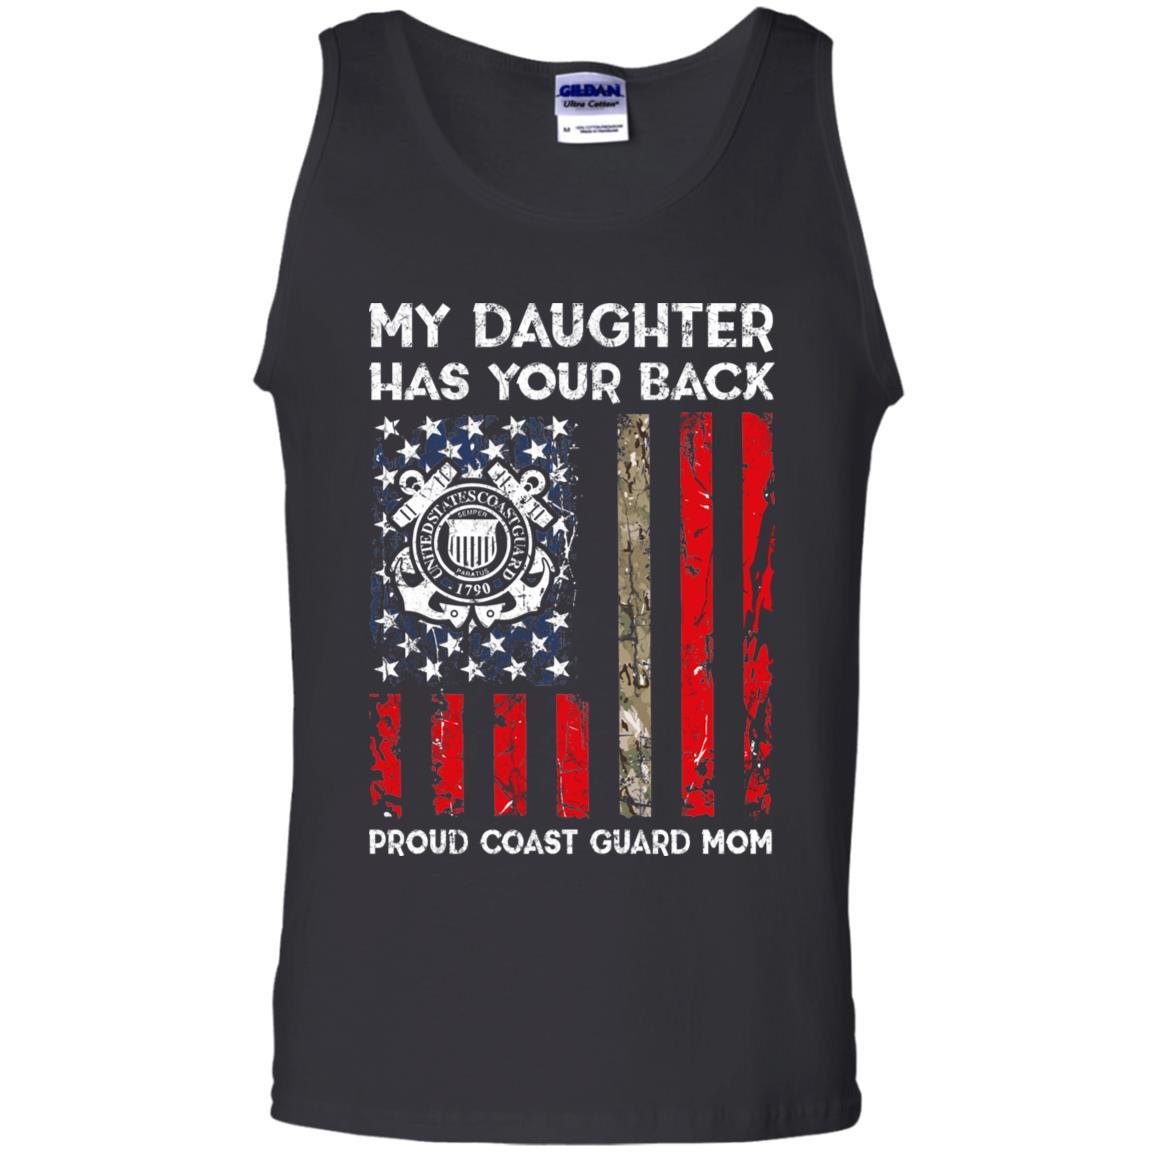 My Daughter Has Your Back - Proud Coast Guard Mom Men T Shirt On Front-TShirt-USCG-Veterans Nation